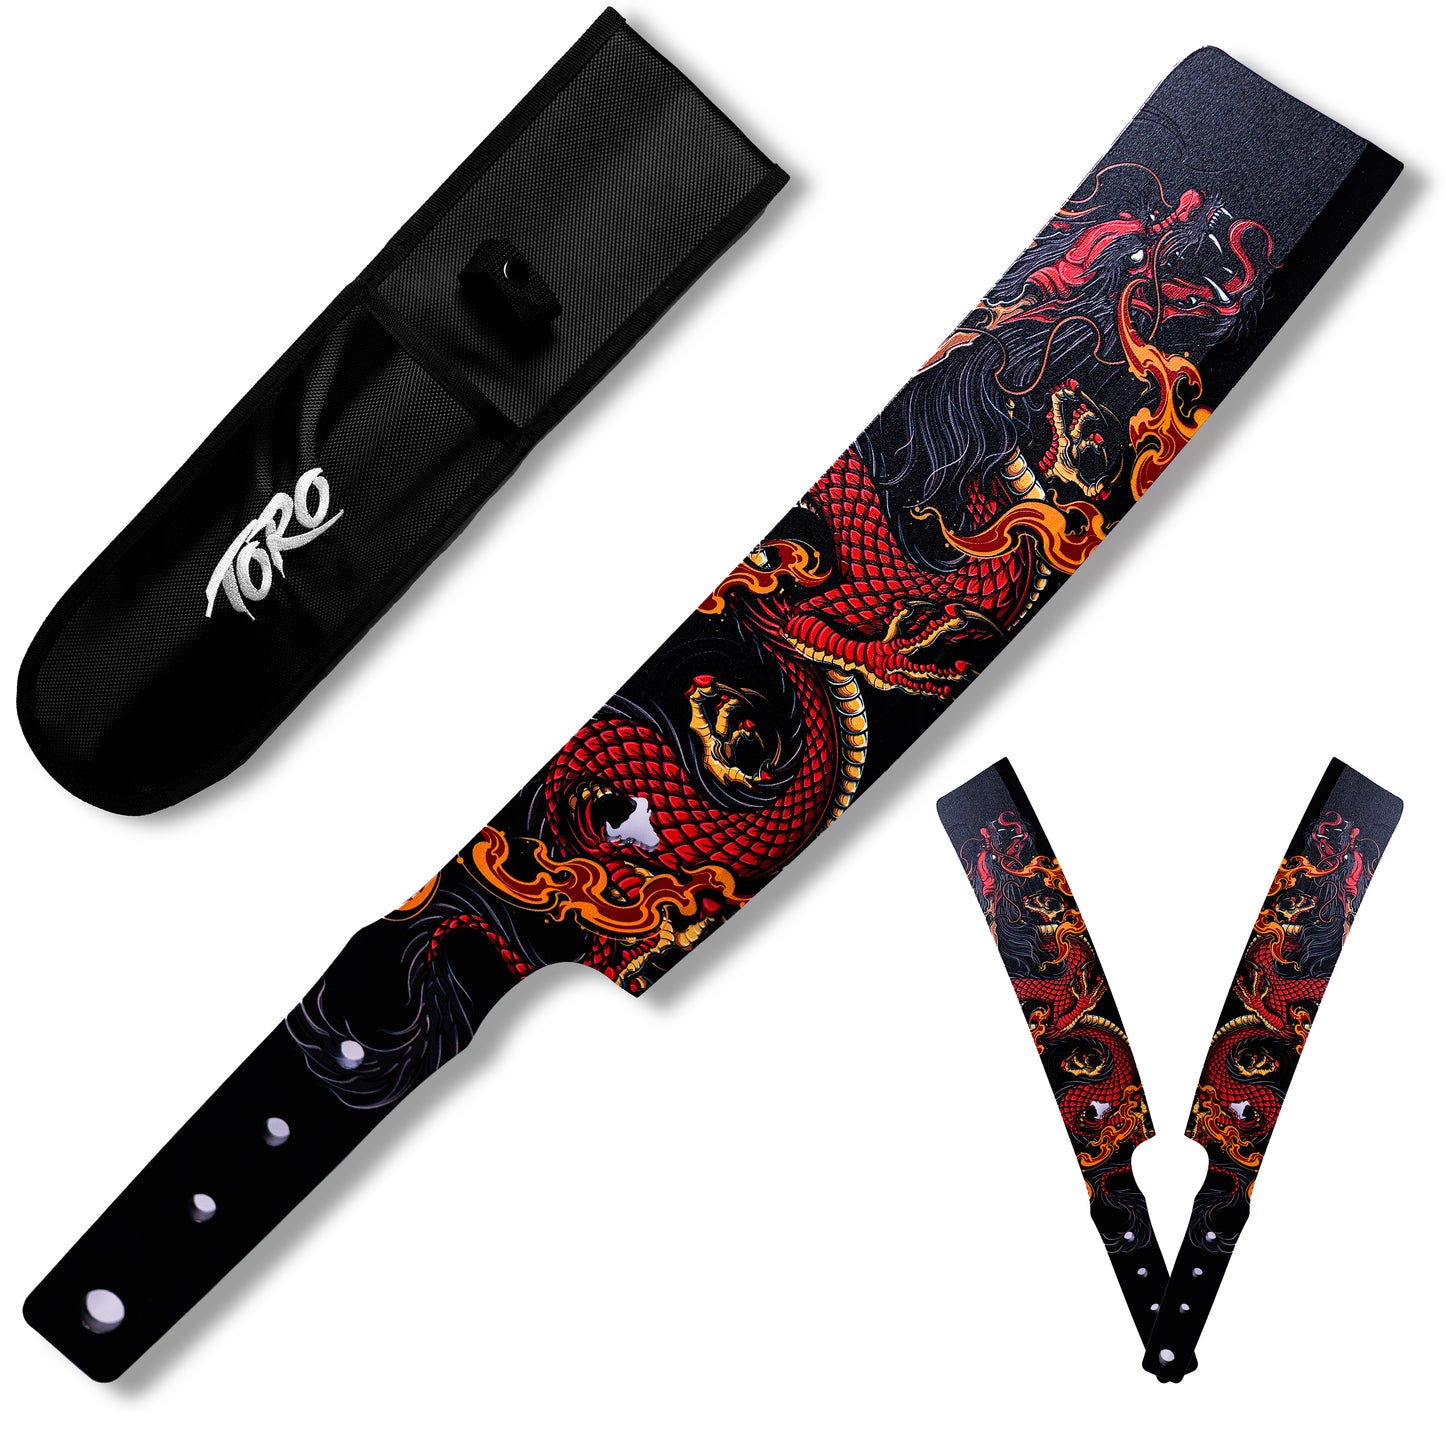 Besito Slim Throwing Knives: Fire Dragon (Set of 3)